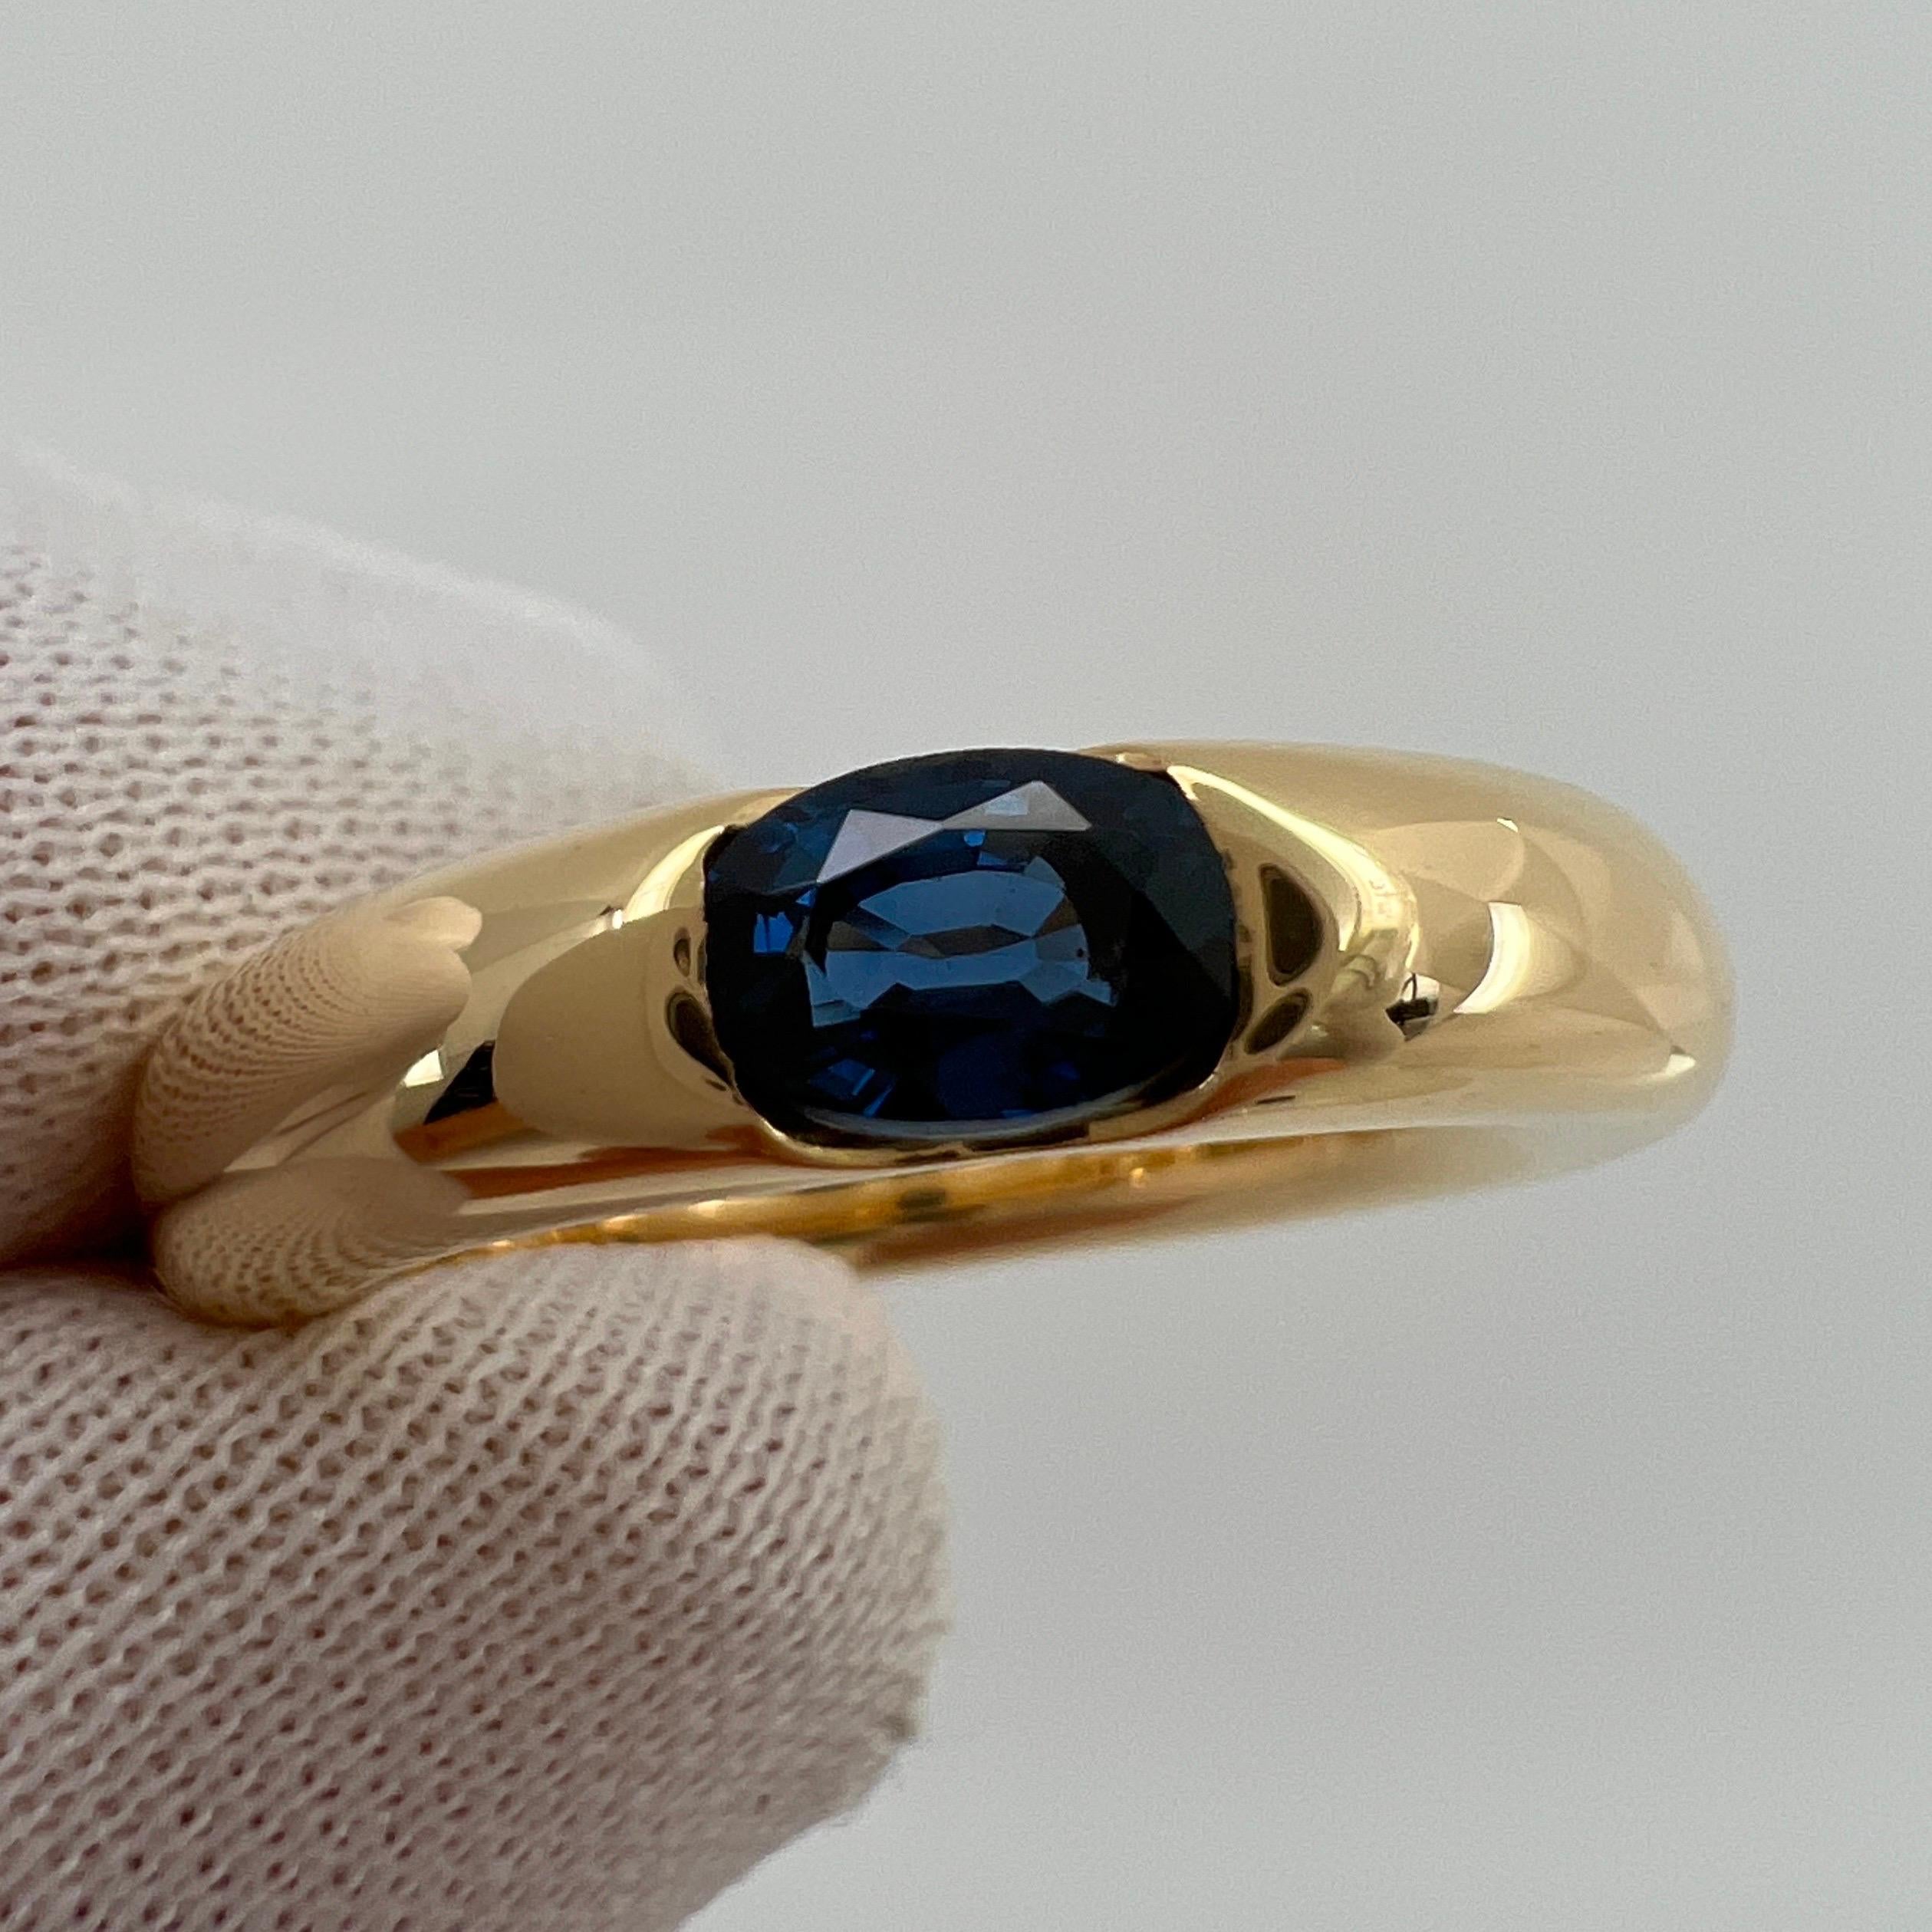 Vintage Cartier Deep Blue Sapphire Oval Ellipse 18k Yellow Gold Solitaire Ring 5